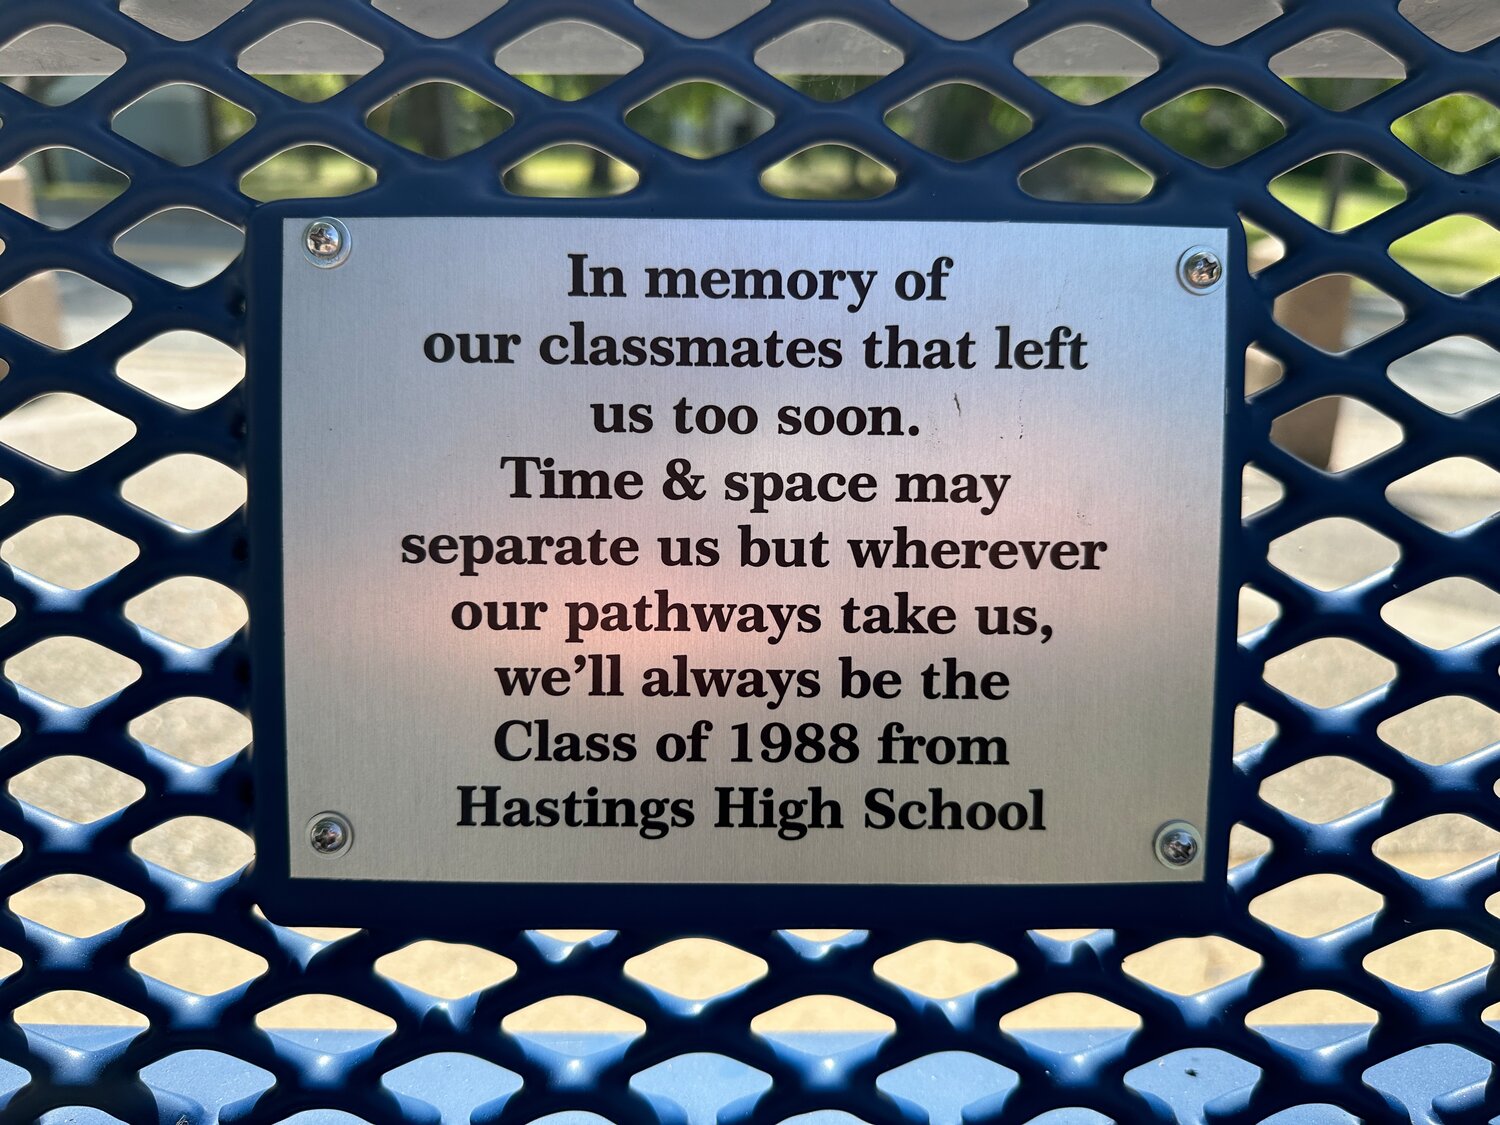 The plaque reads: “In memory of our classmates that left us too soon. Time & space may separate us but wherever our pathways take us, we’ll always be from the Class of 1988 from Hastings High School.”